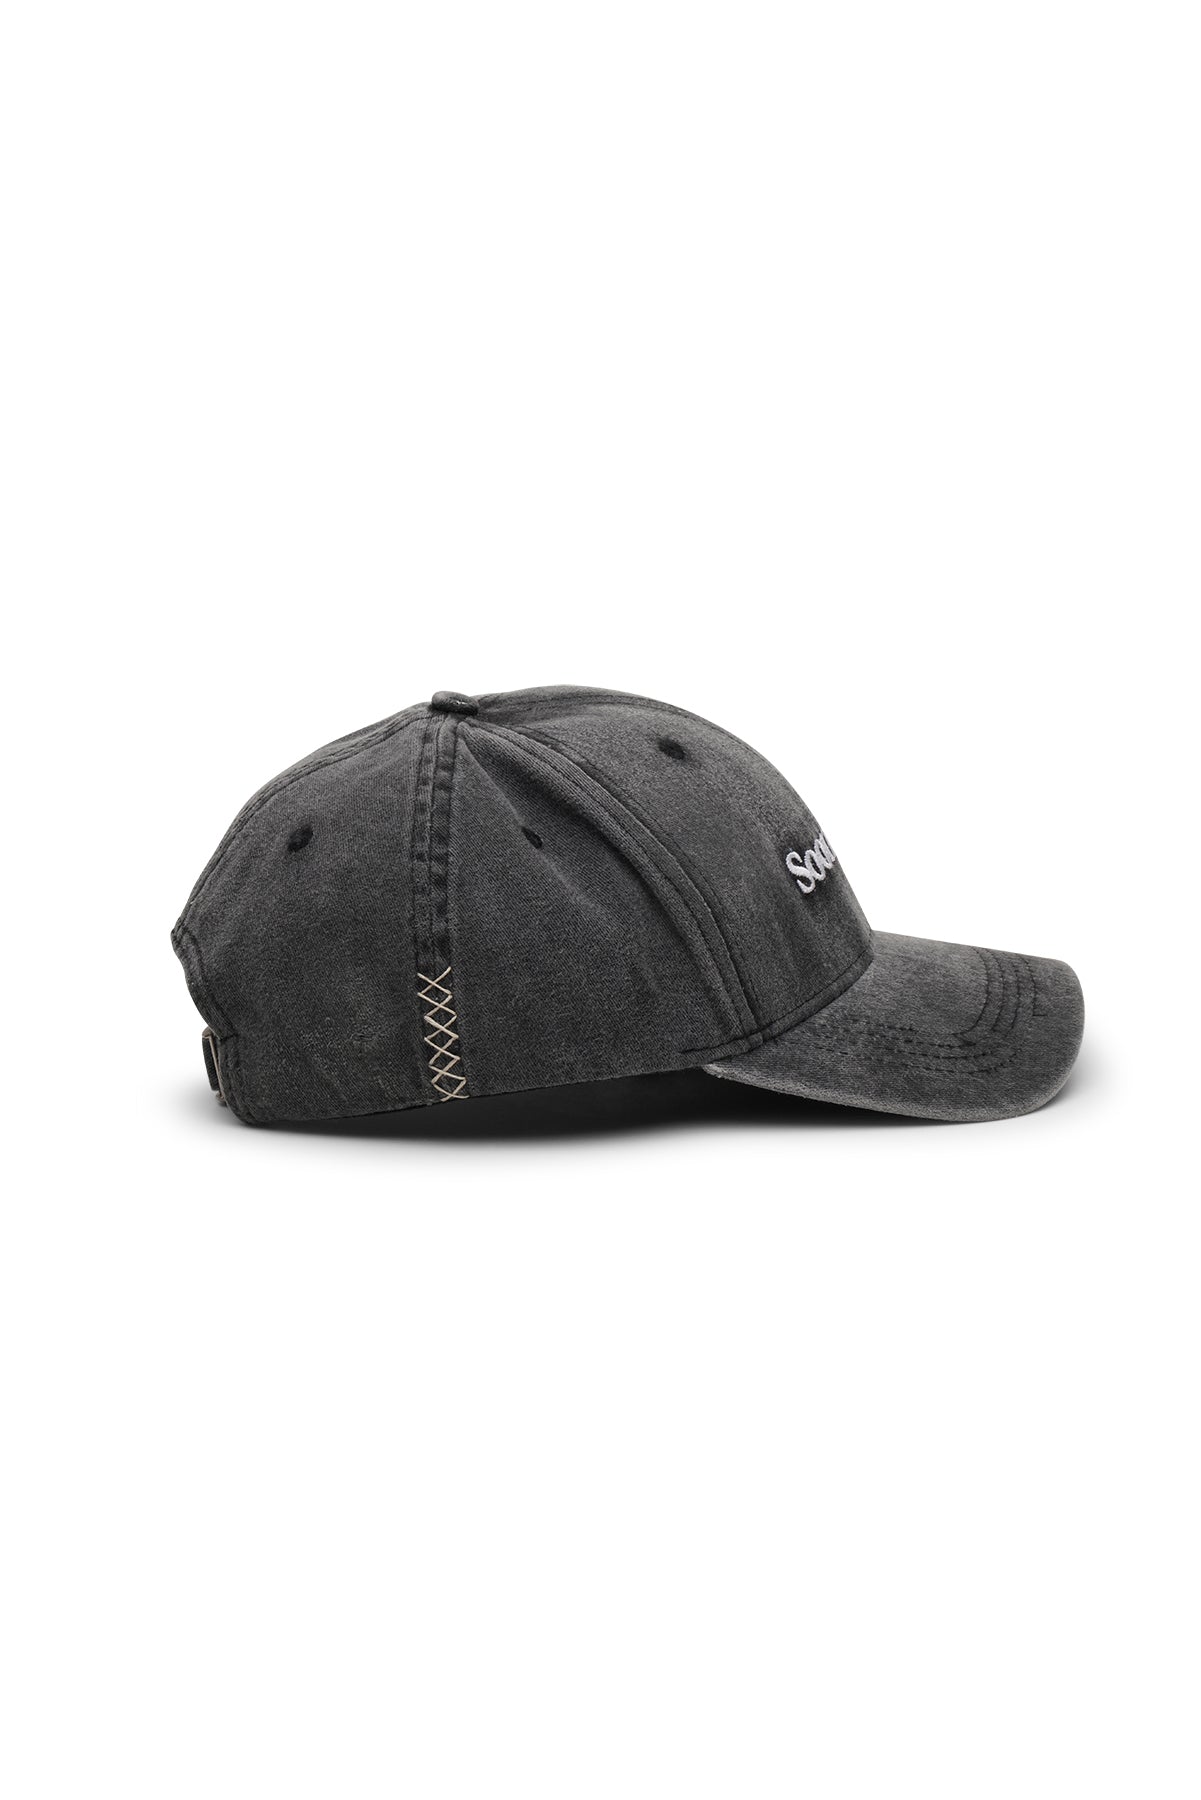 Black vintage washed cotton cap by SoonNoon